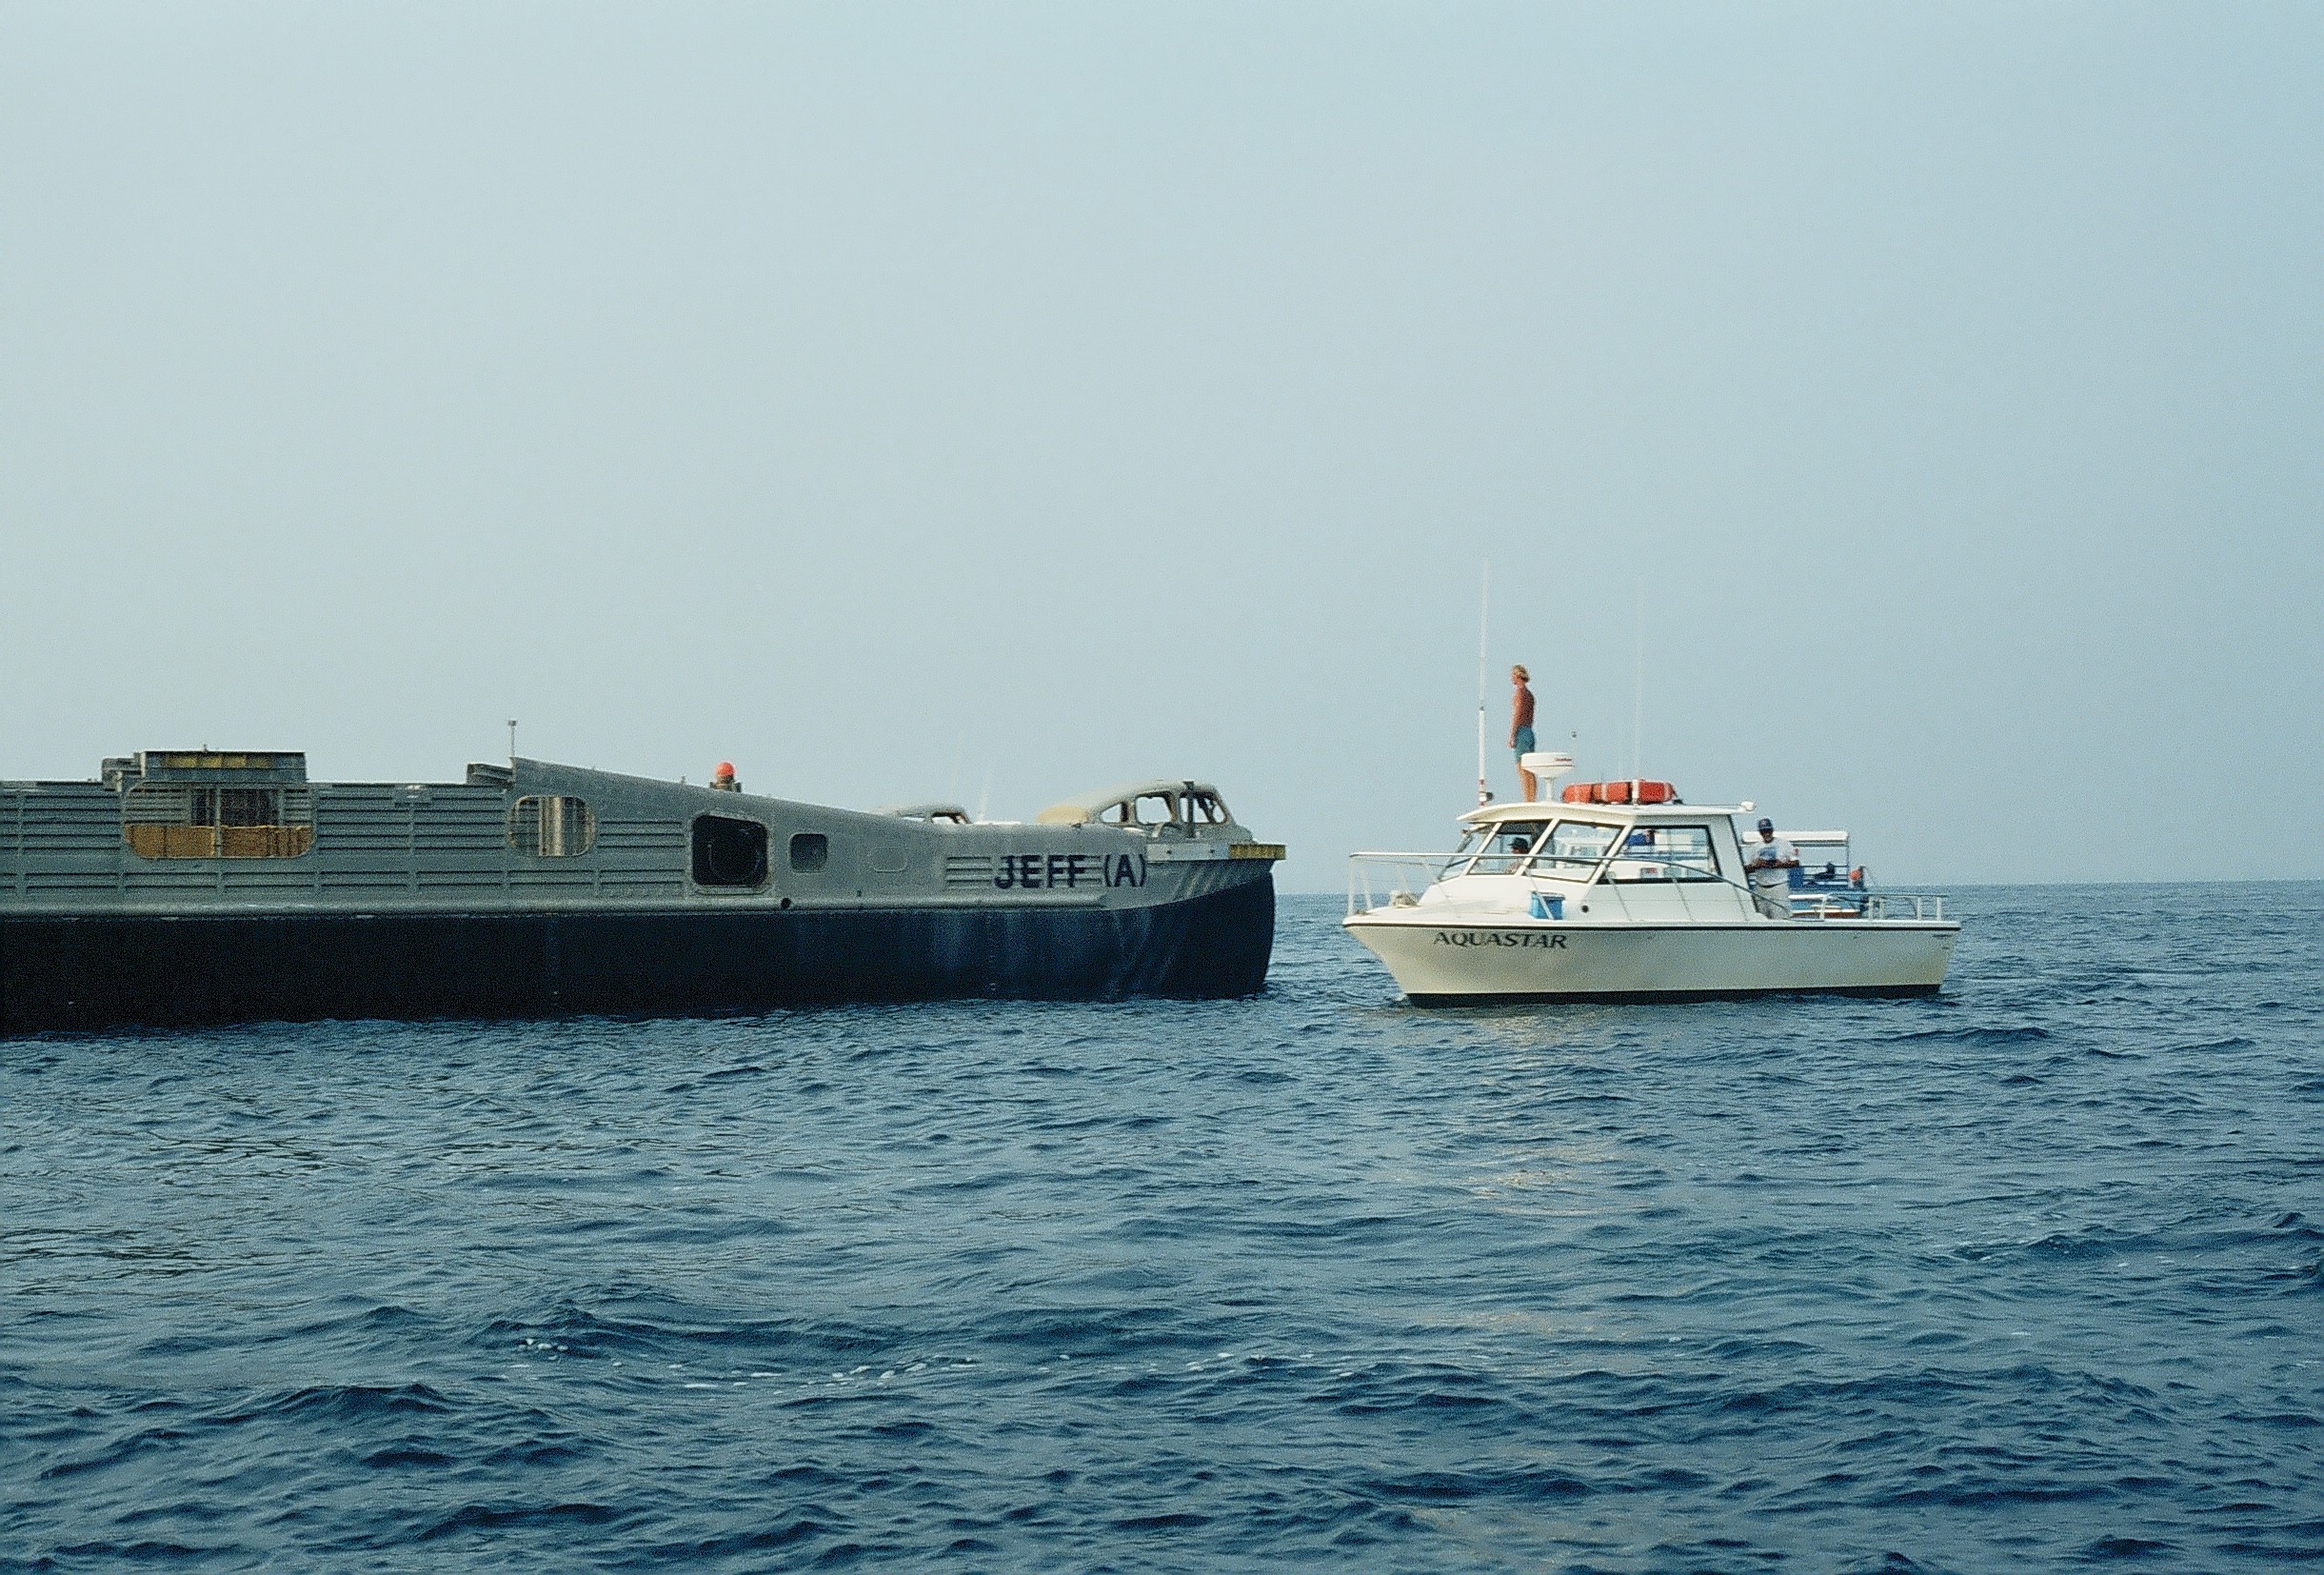 The LCAC/Hovercraft